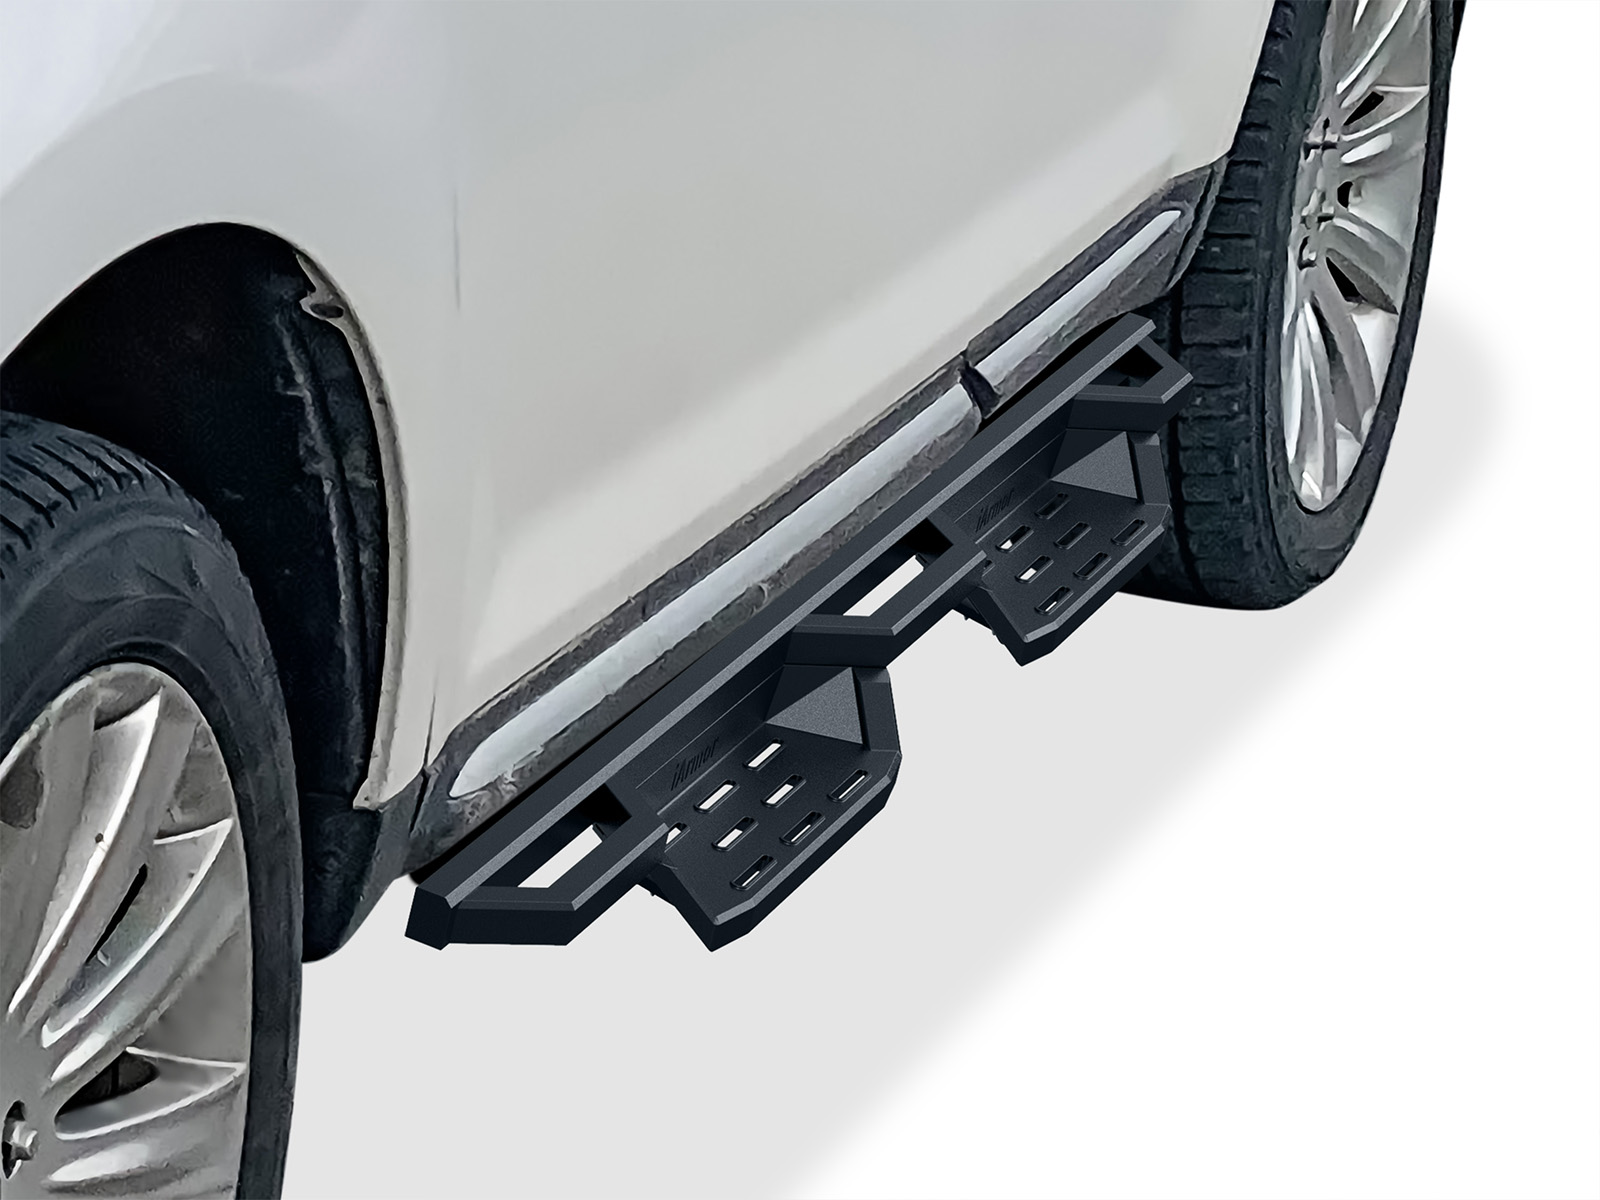 2007-2014 Ford Edge 2007-2015 Lincoln MKX  (Excl. Sport & Eco-Boost Model|Will not work on vehicles equipped with power retracting boards) Both Sides Side Armor ST